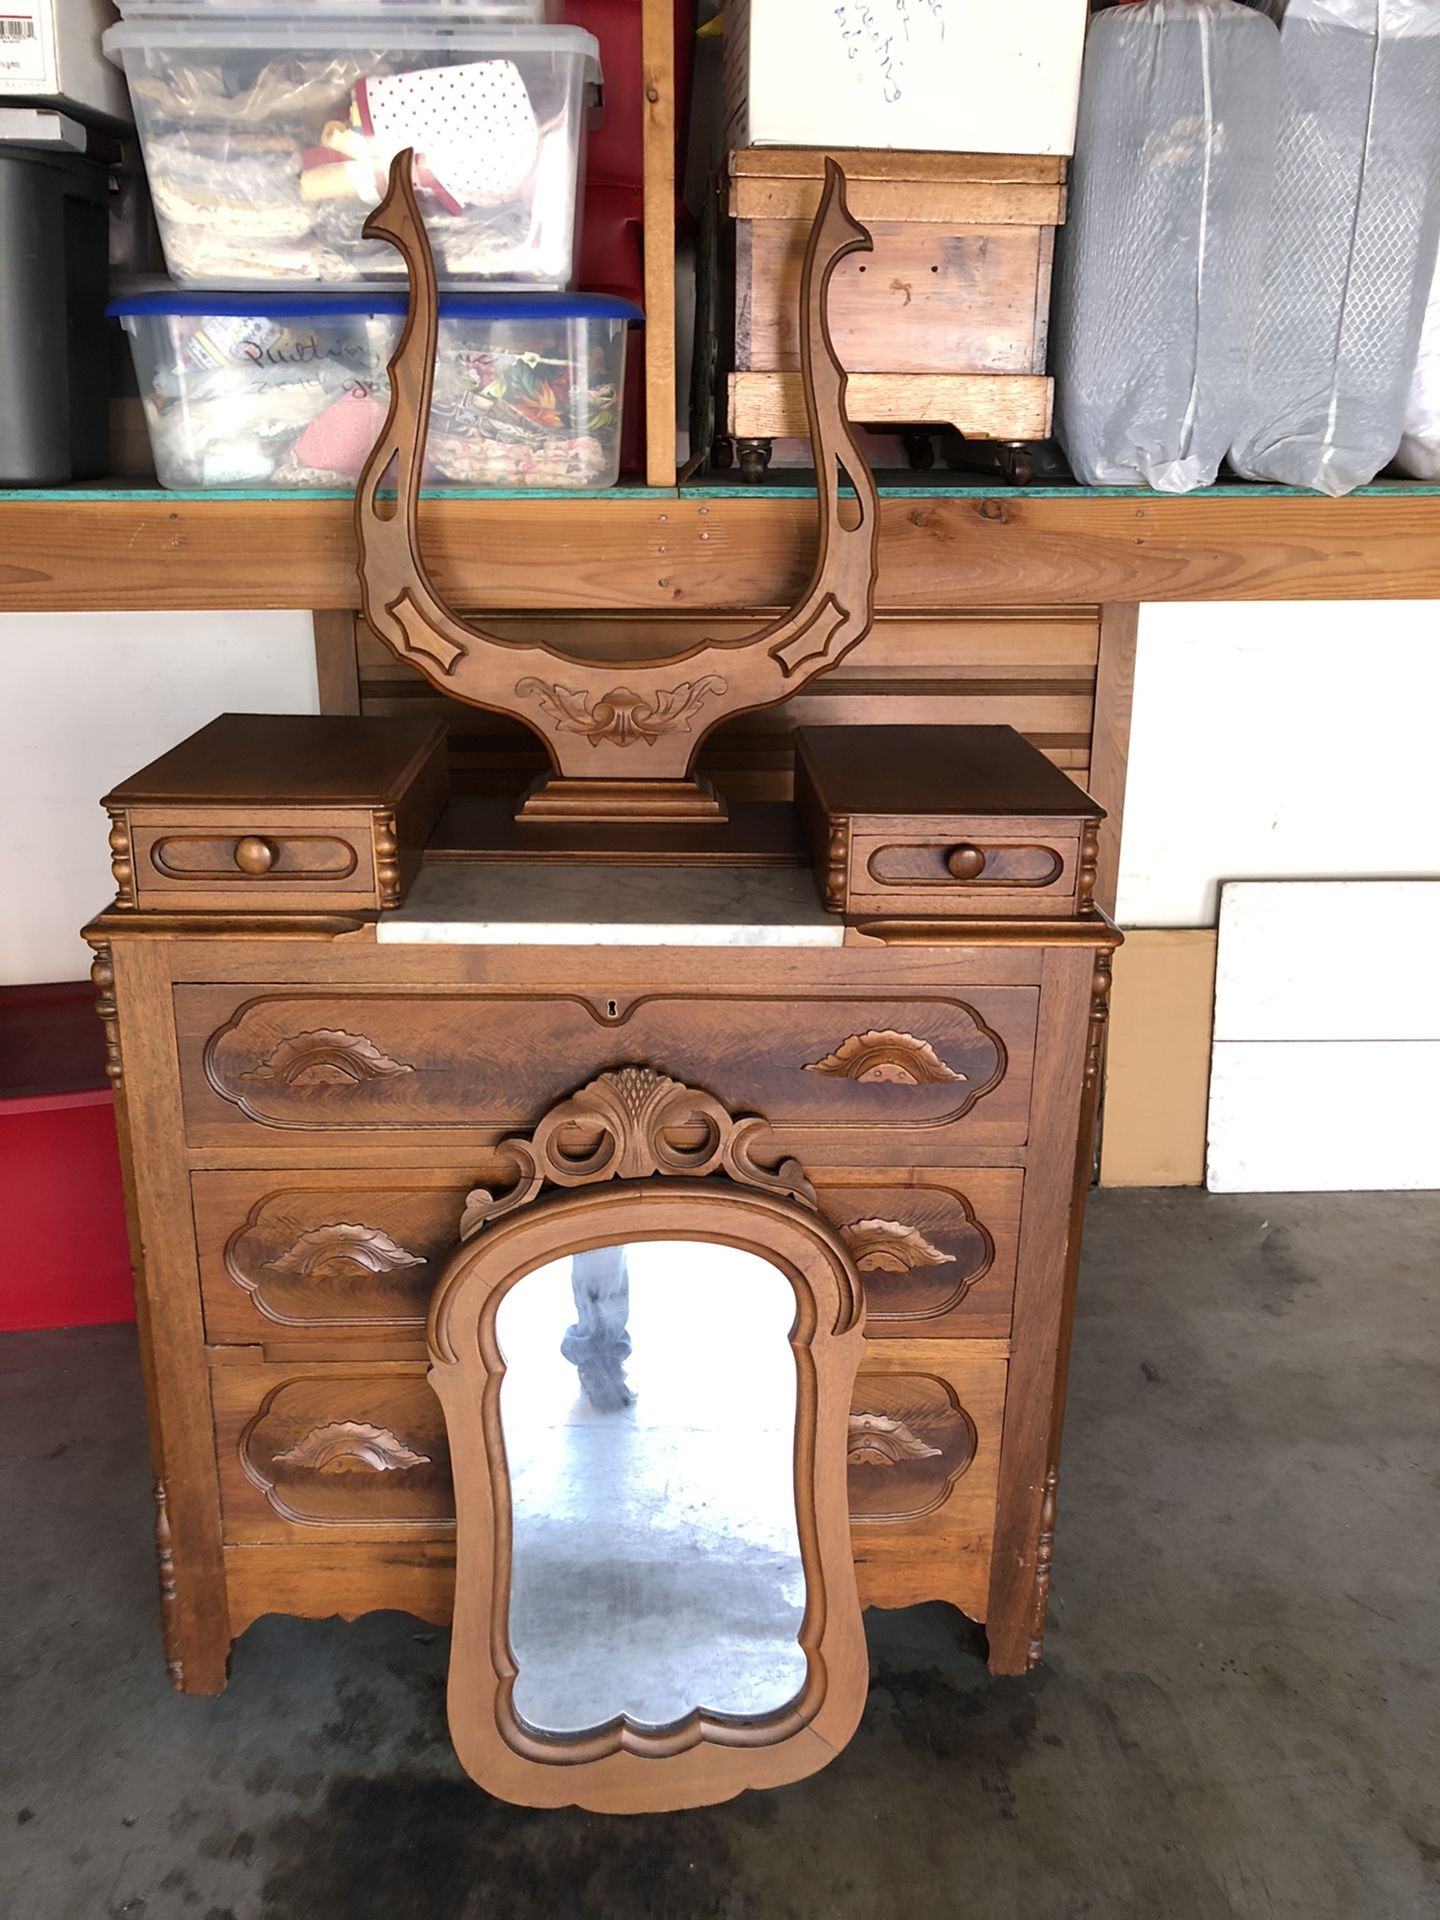 Antique dresser just reduced Seller very motivated. Great piece of furniture.